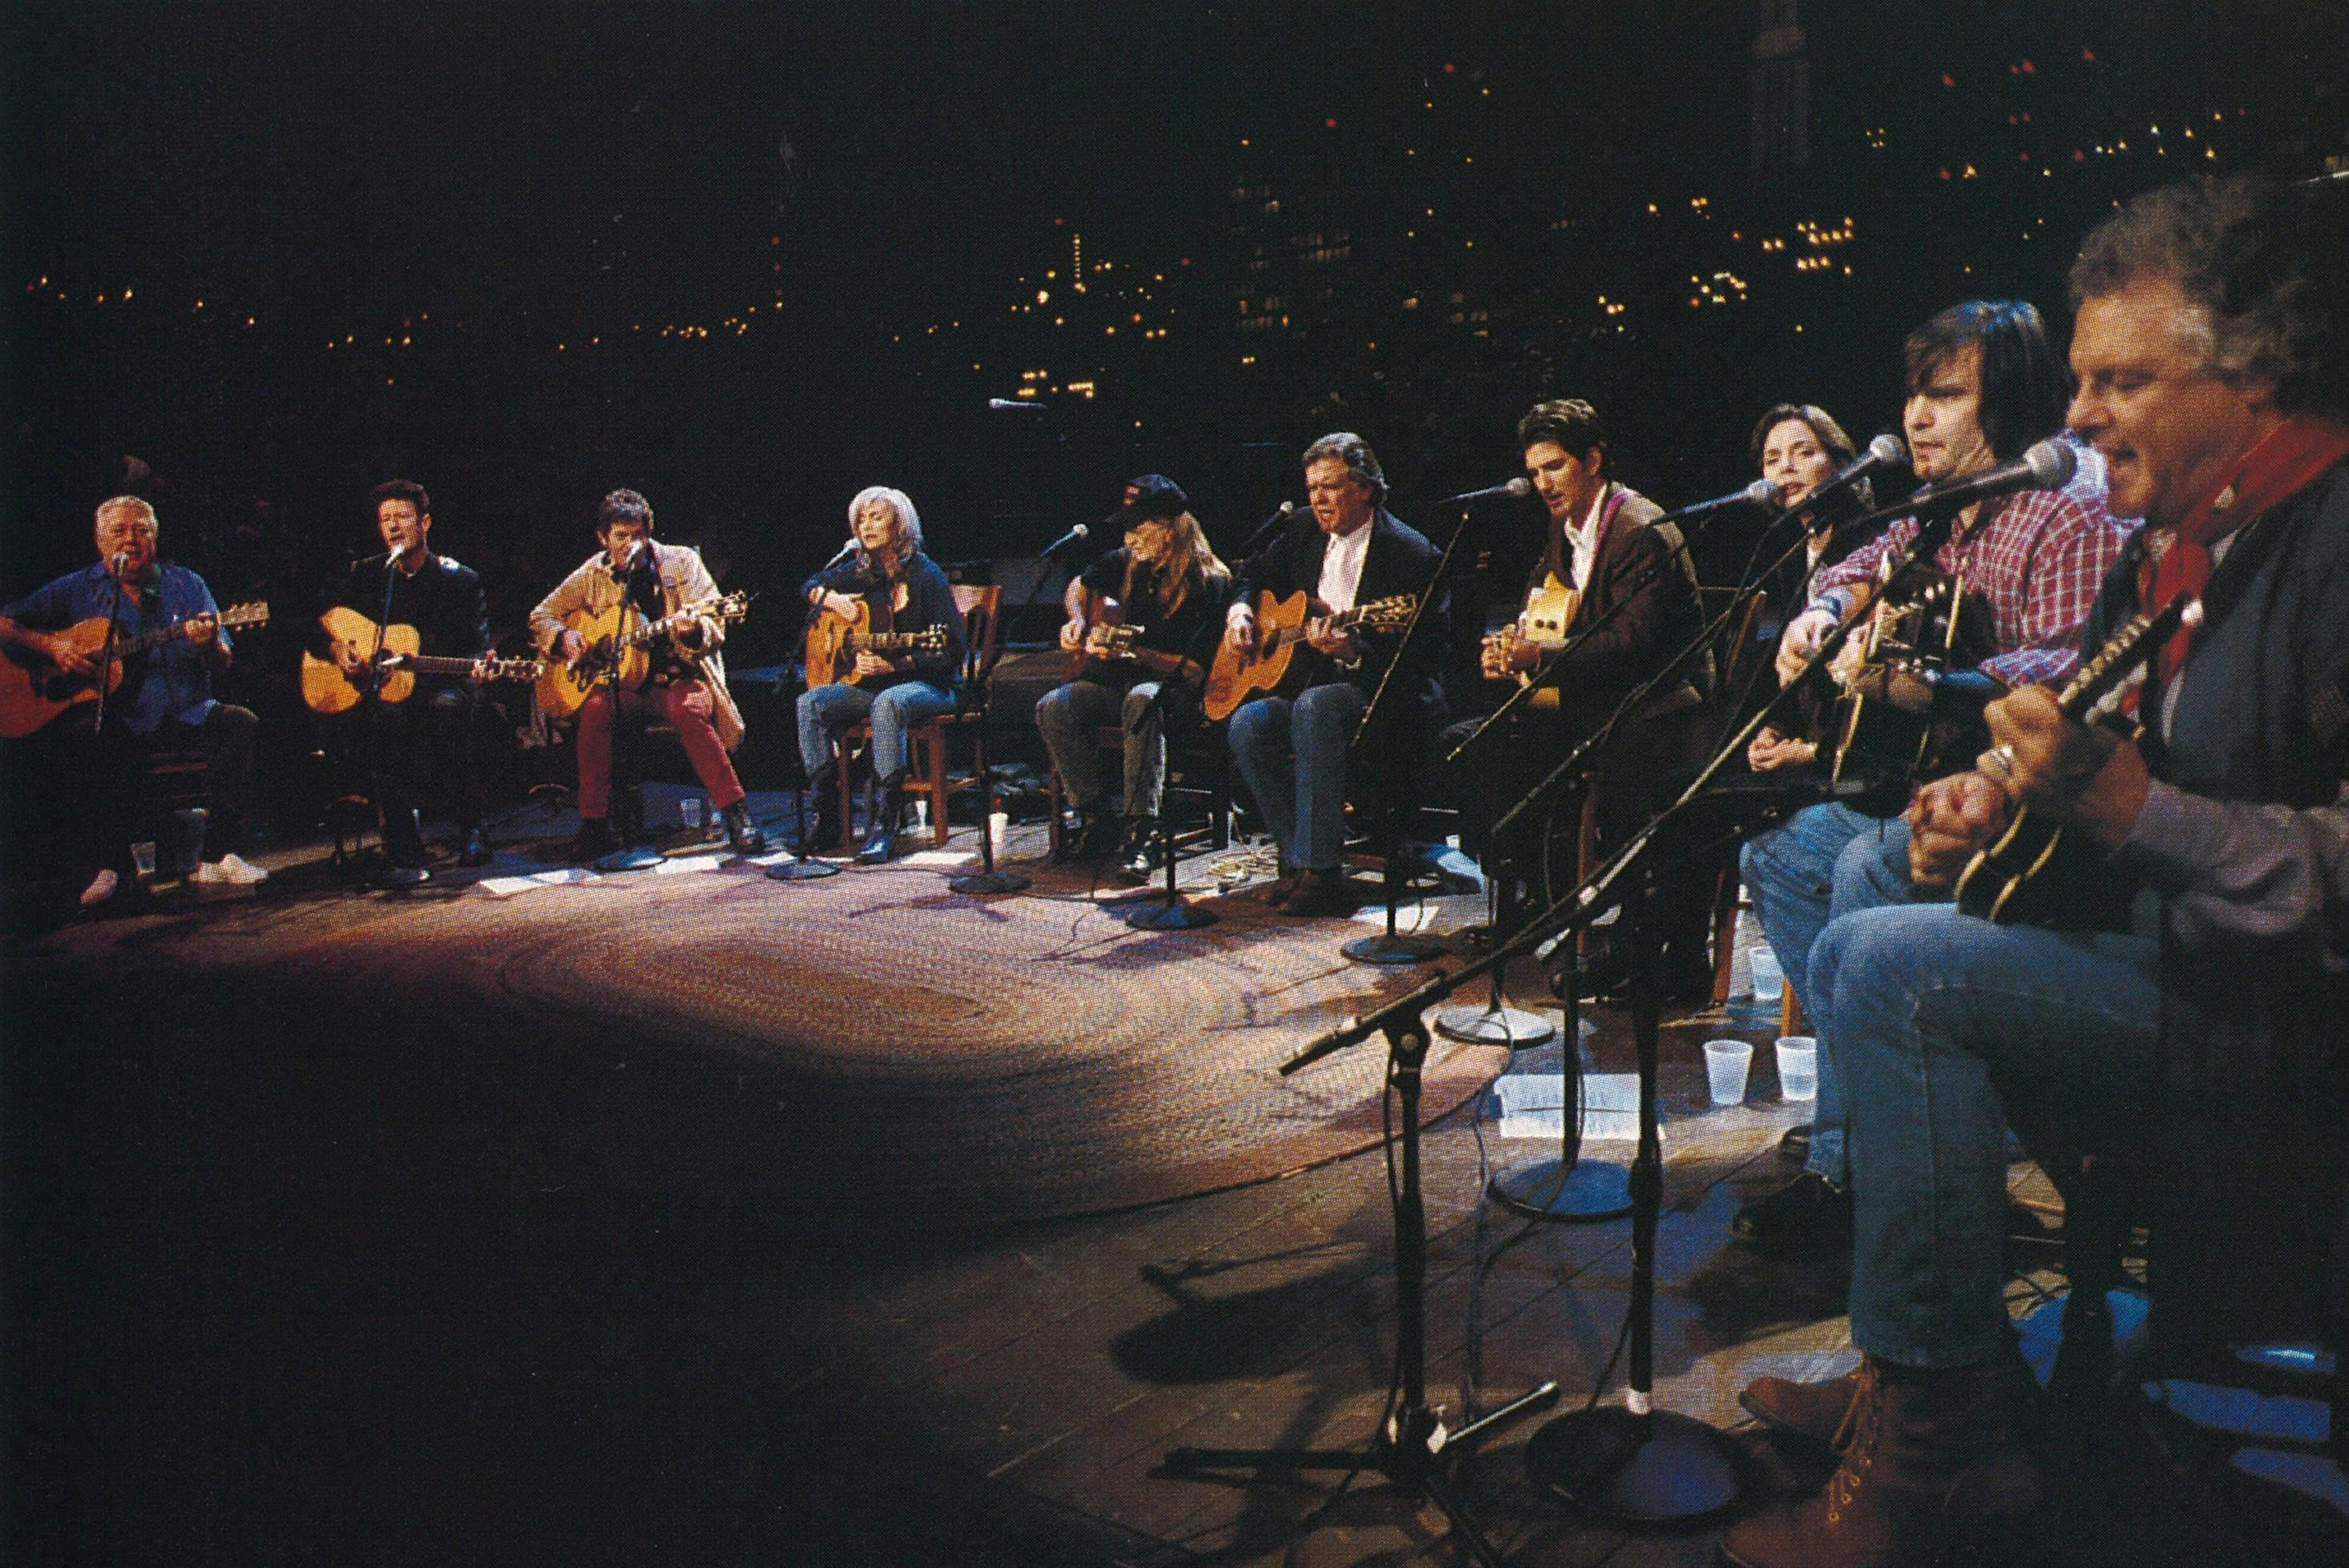 Townes Van Zandt life and work being celebrated at the Austin City Limits taping by Jack Clement, Lyle Lovett, Rodney Crowell, Emmylou Harris, Willie Nelson, Guy Clark, John Townes Van Zandt, Nanci Griffith, Steve Earle, and Peter Rowan.